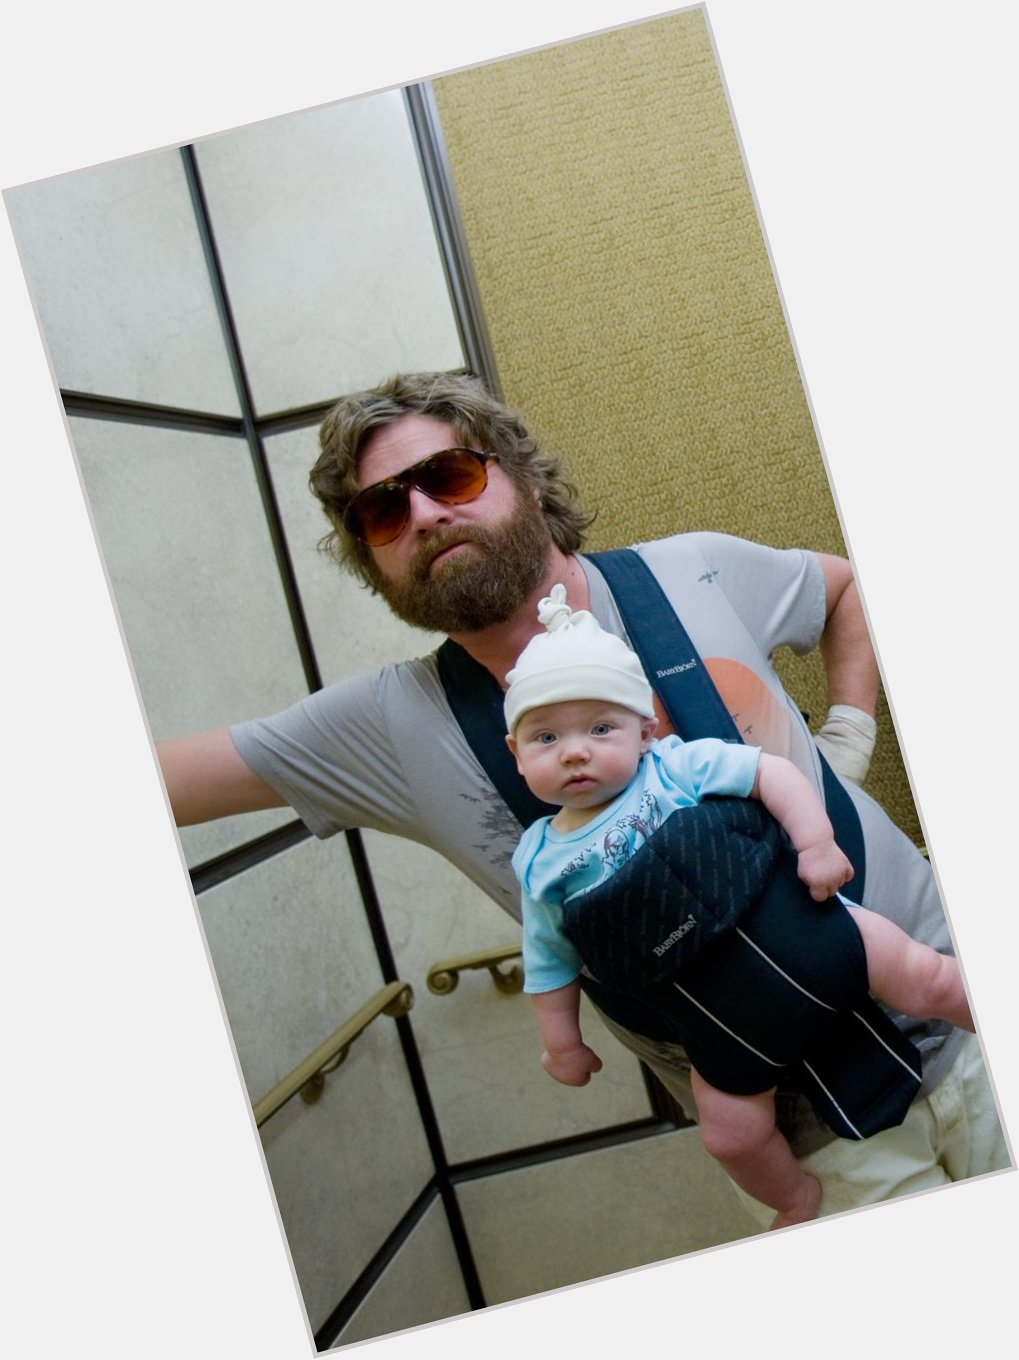  Hey guys, you ready to let the dogs out? Happy Birthday to the wolf pack pioneer, Zach Galifianakis!  